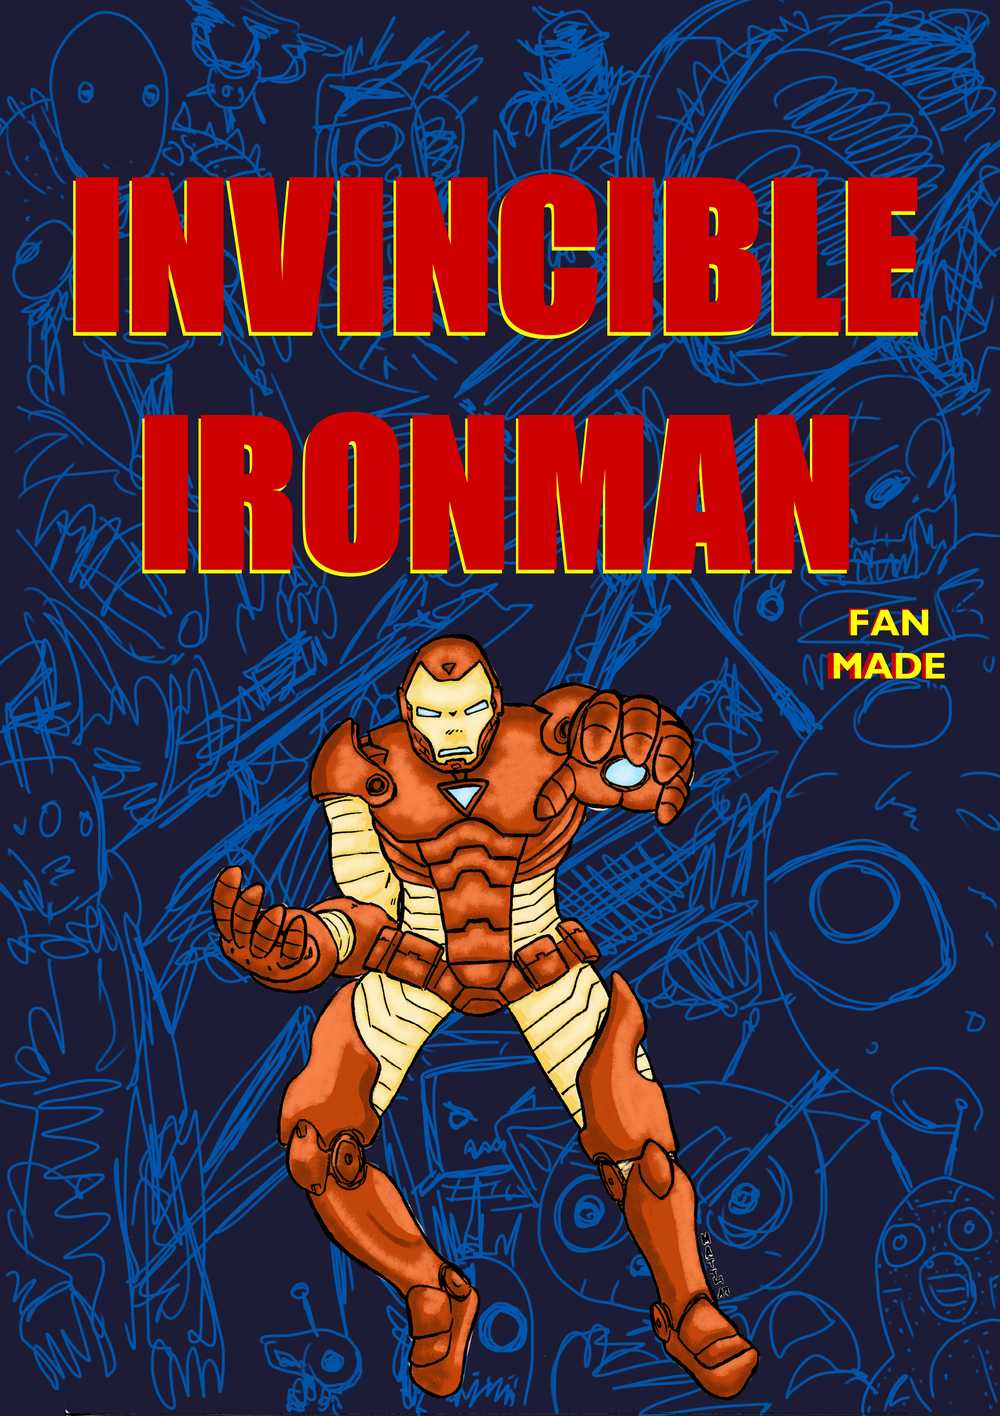 Ironman Fan Made - Invincible Ironman - couverture